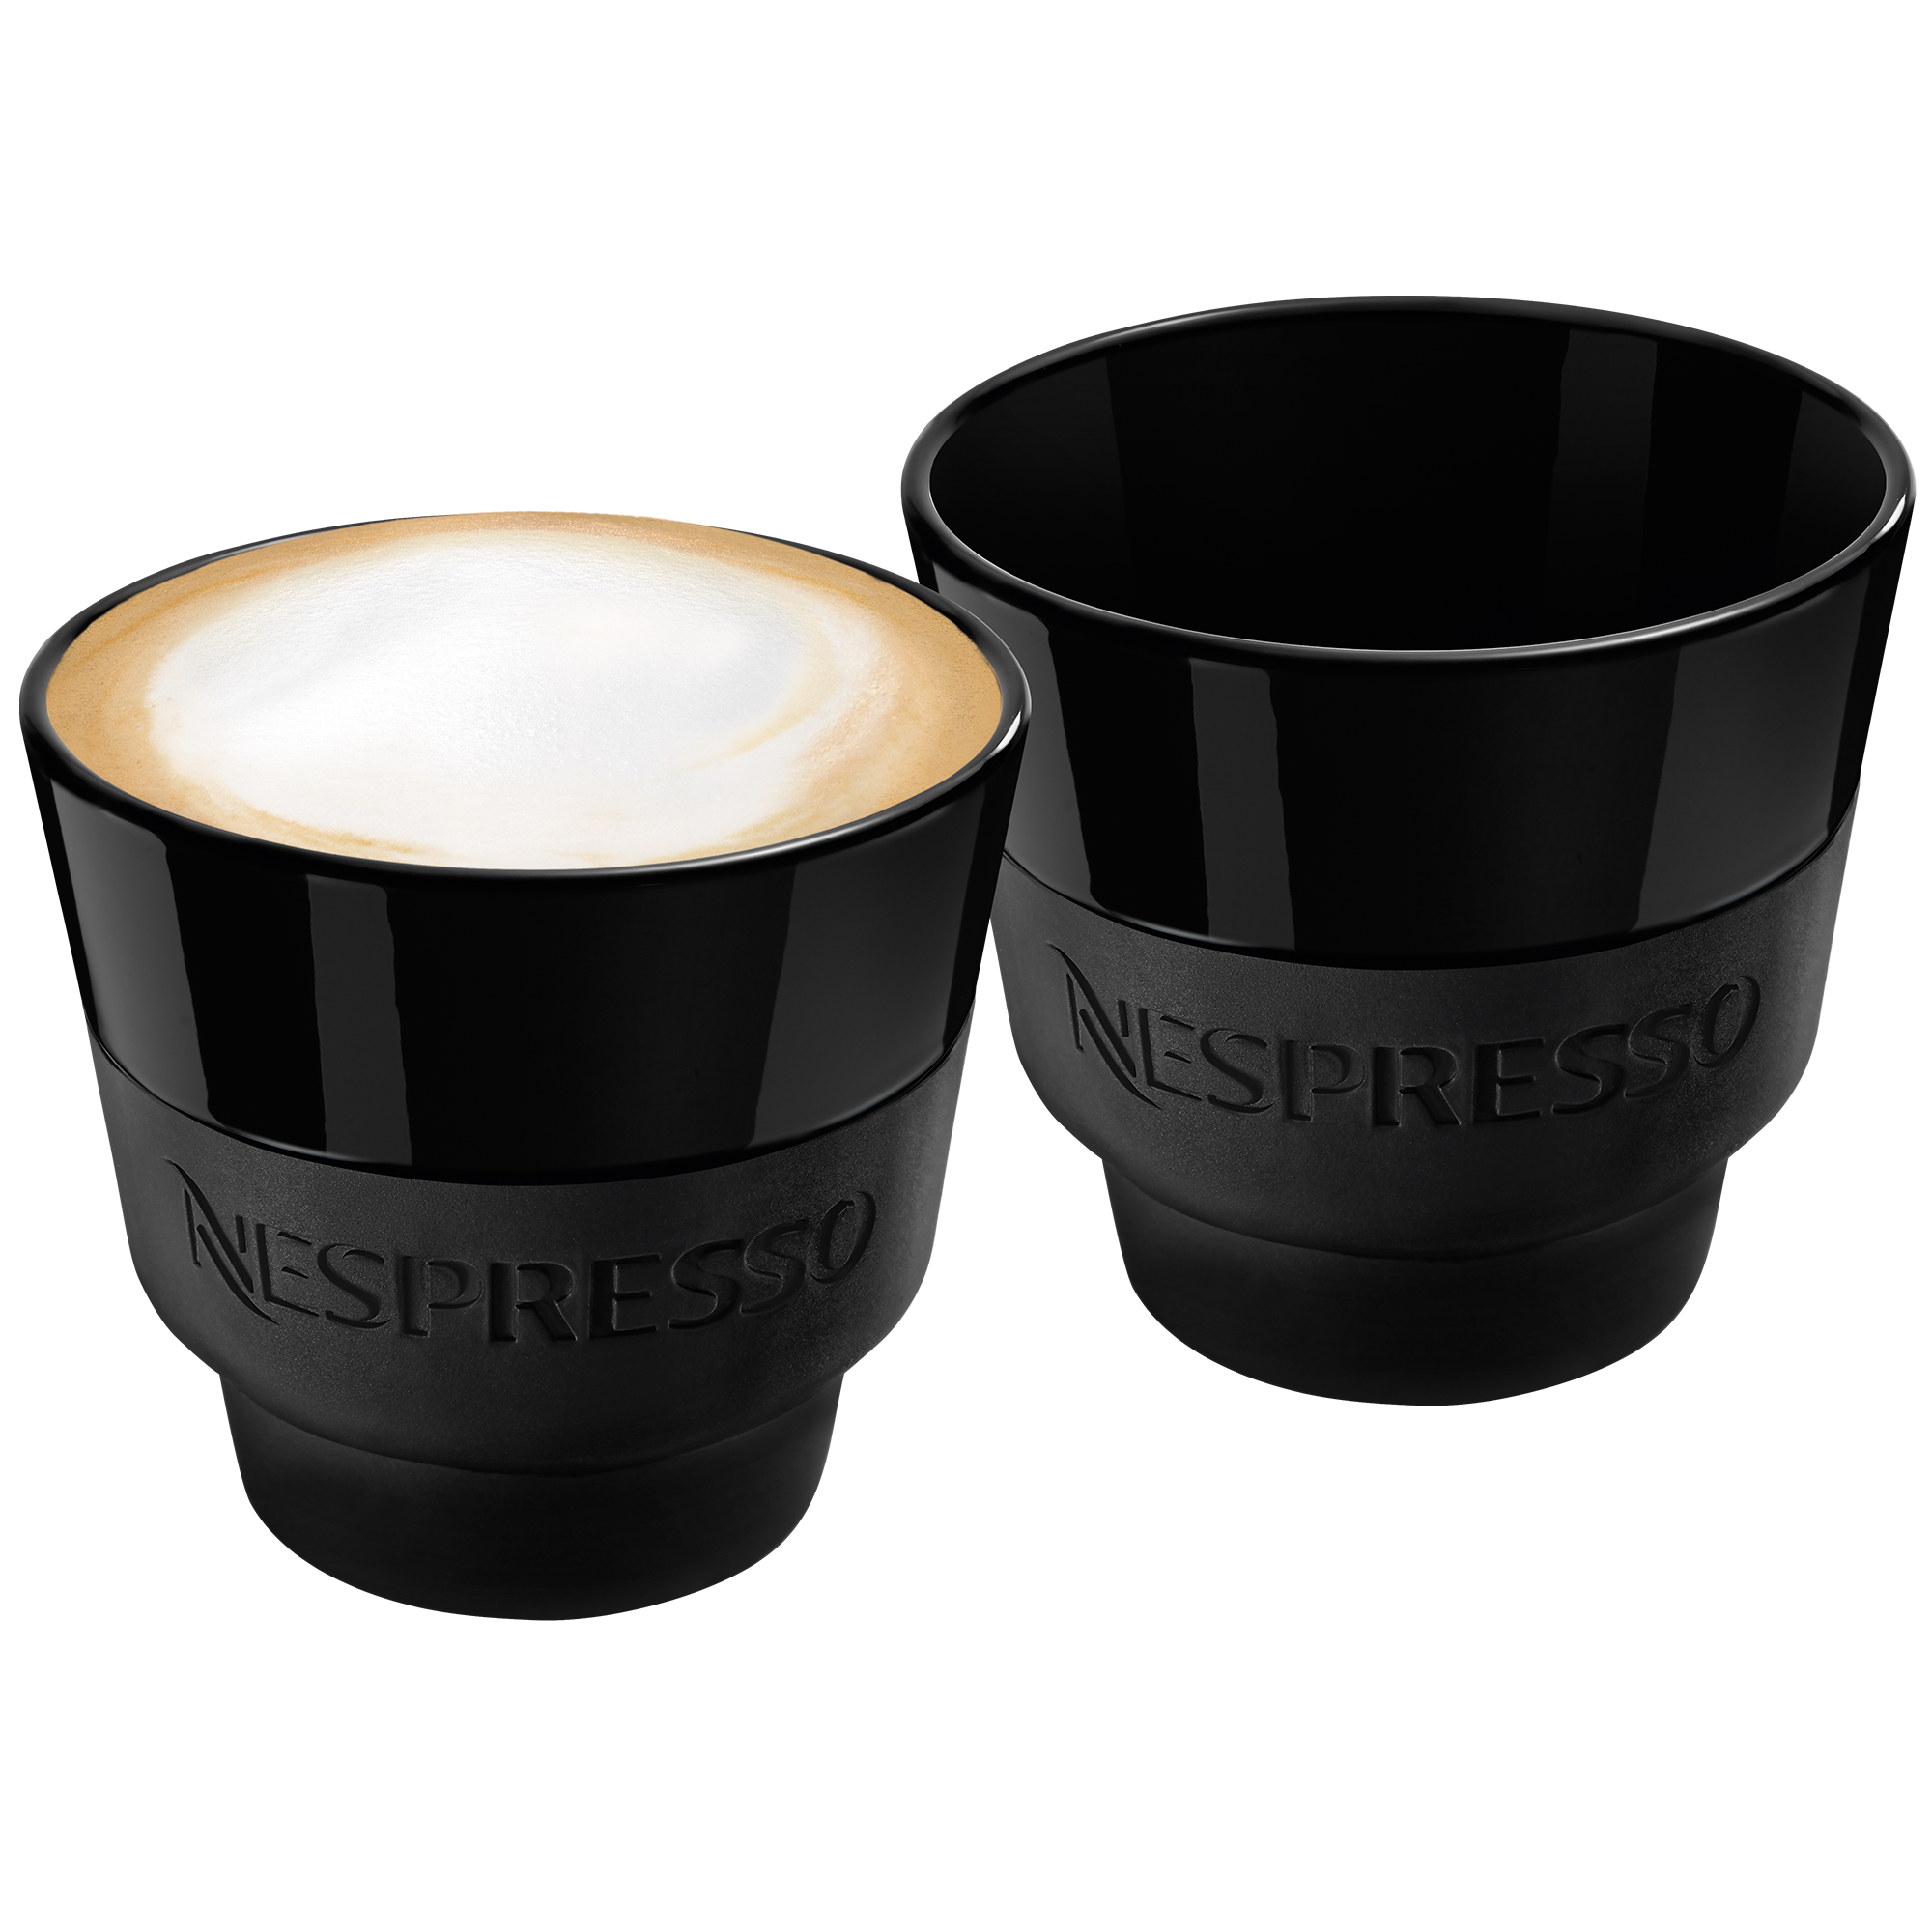 Nespresso 2 Touch Espresso Cups In Black Porcelain & Soft-Touch Silicone  In ... 